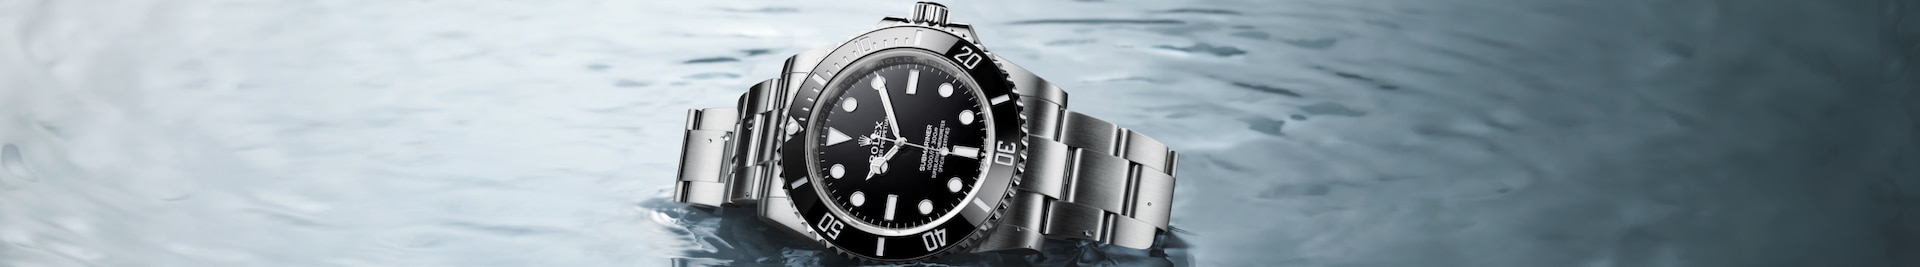 Rolex Reference Among Divers Banner.jpg